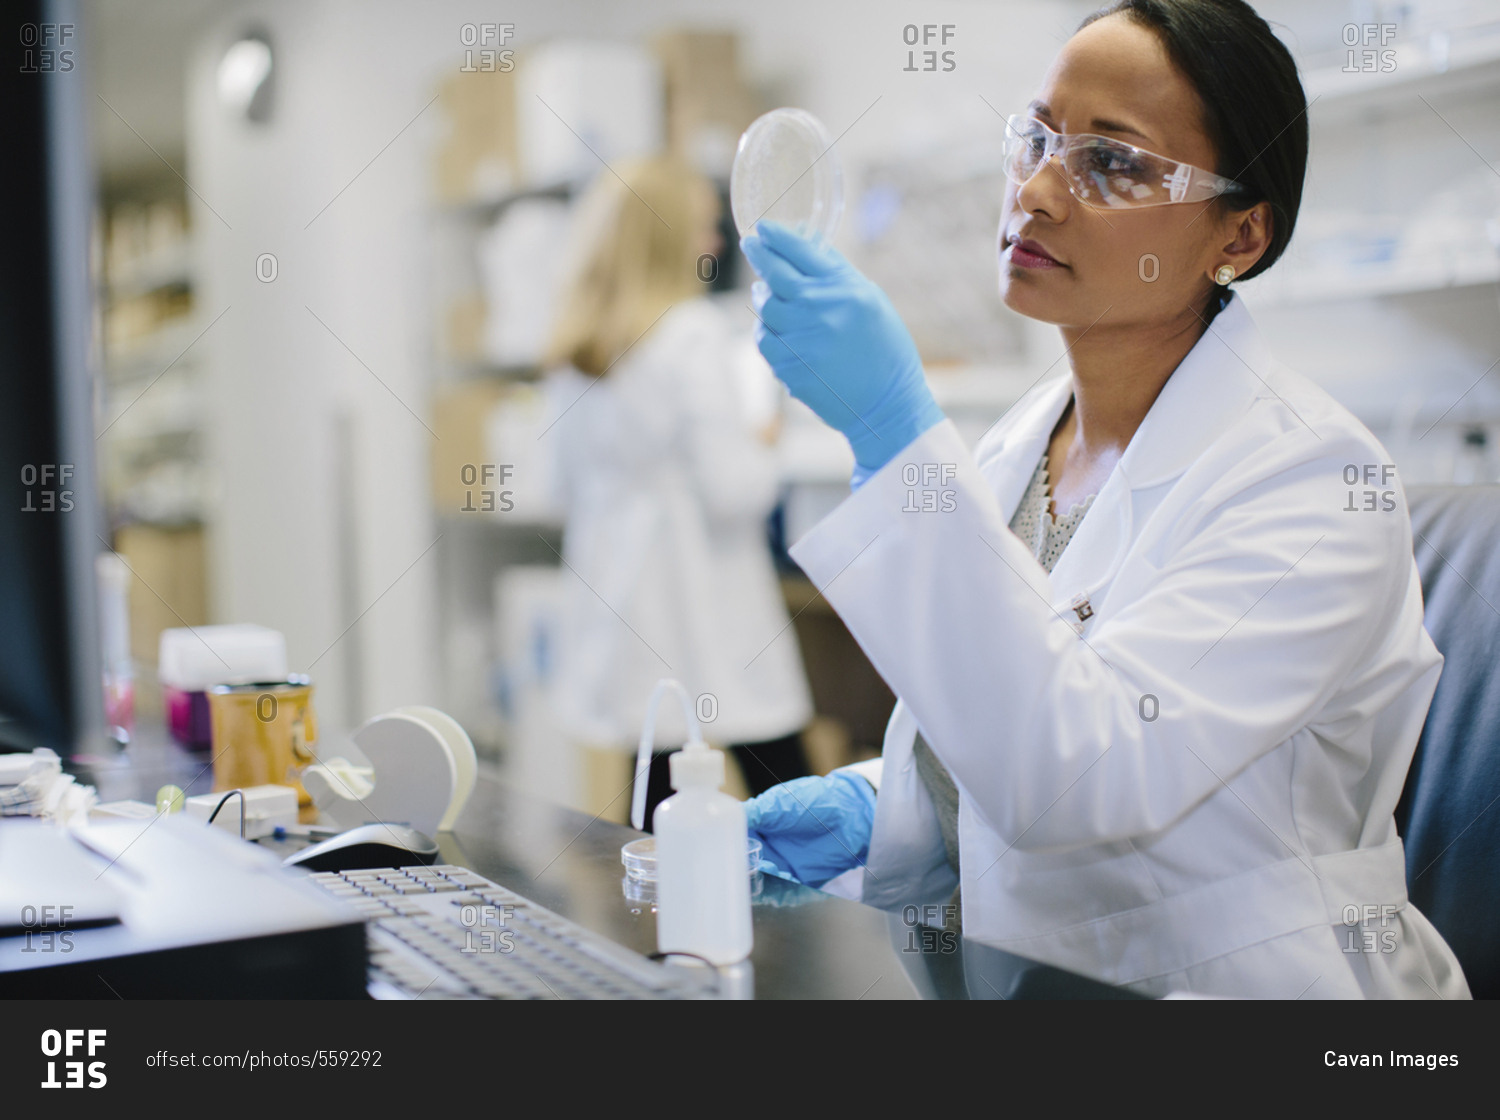 Female doctor examining petri dish at desk with coworker in background at medical room